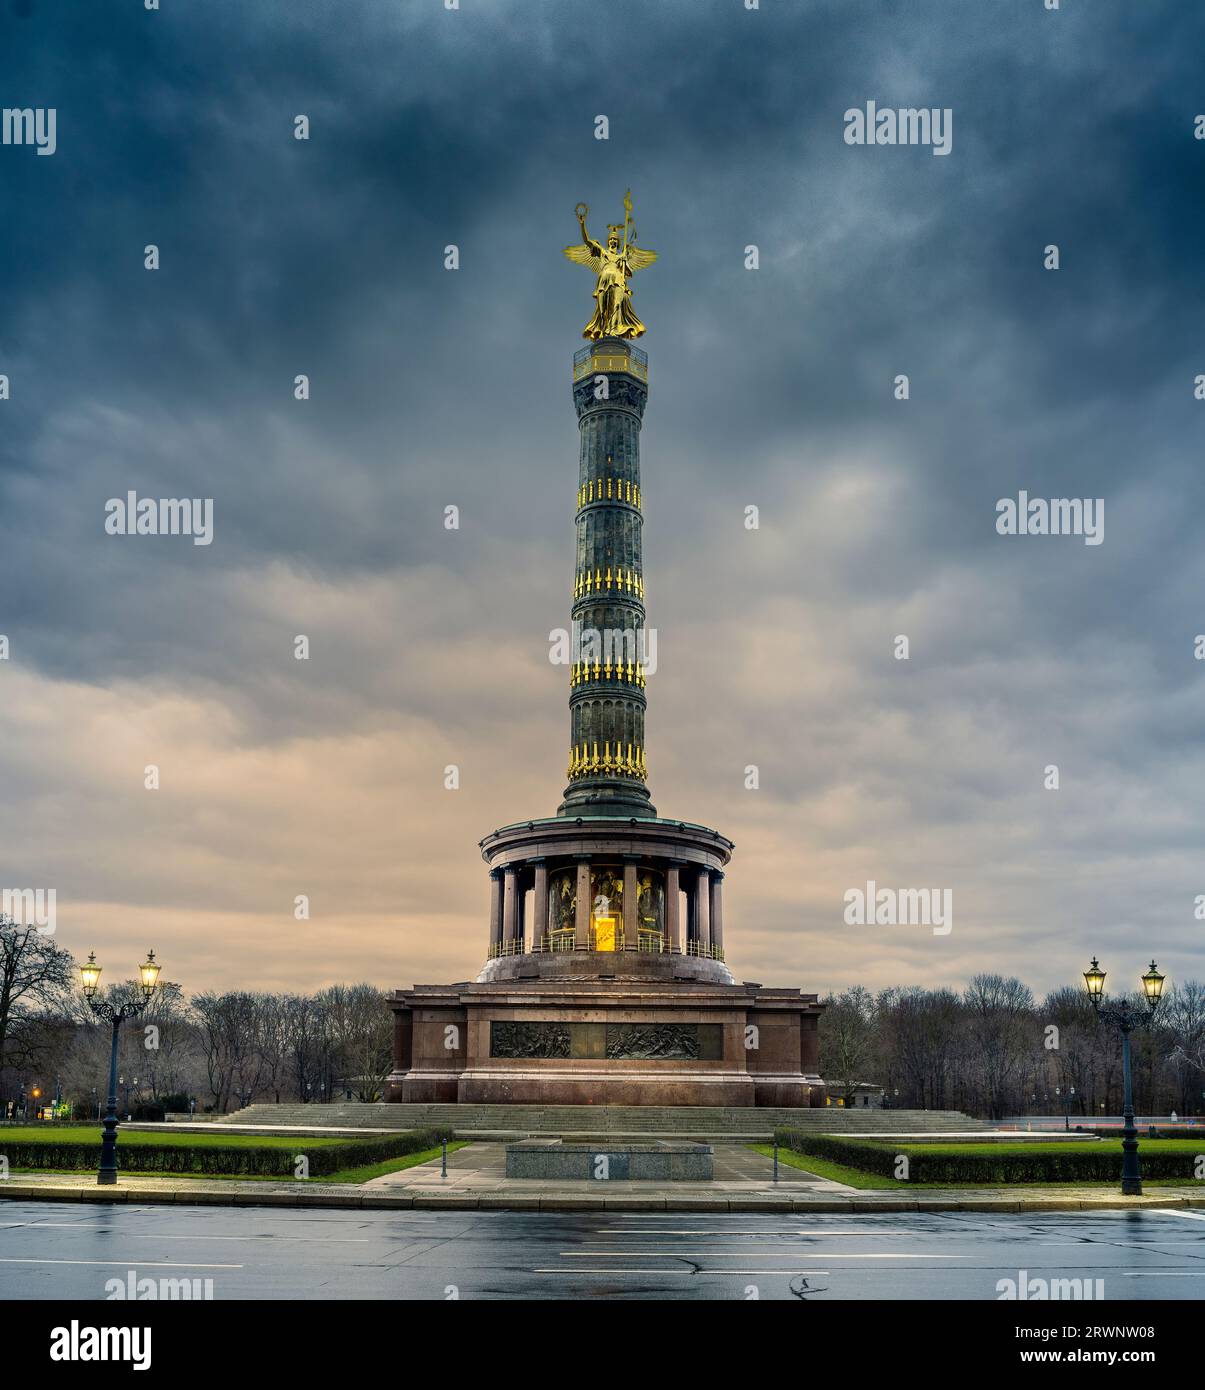 Berlin, Siegessaule Monument with Victory Column Stock Photo